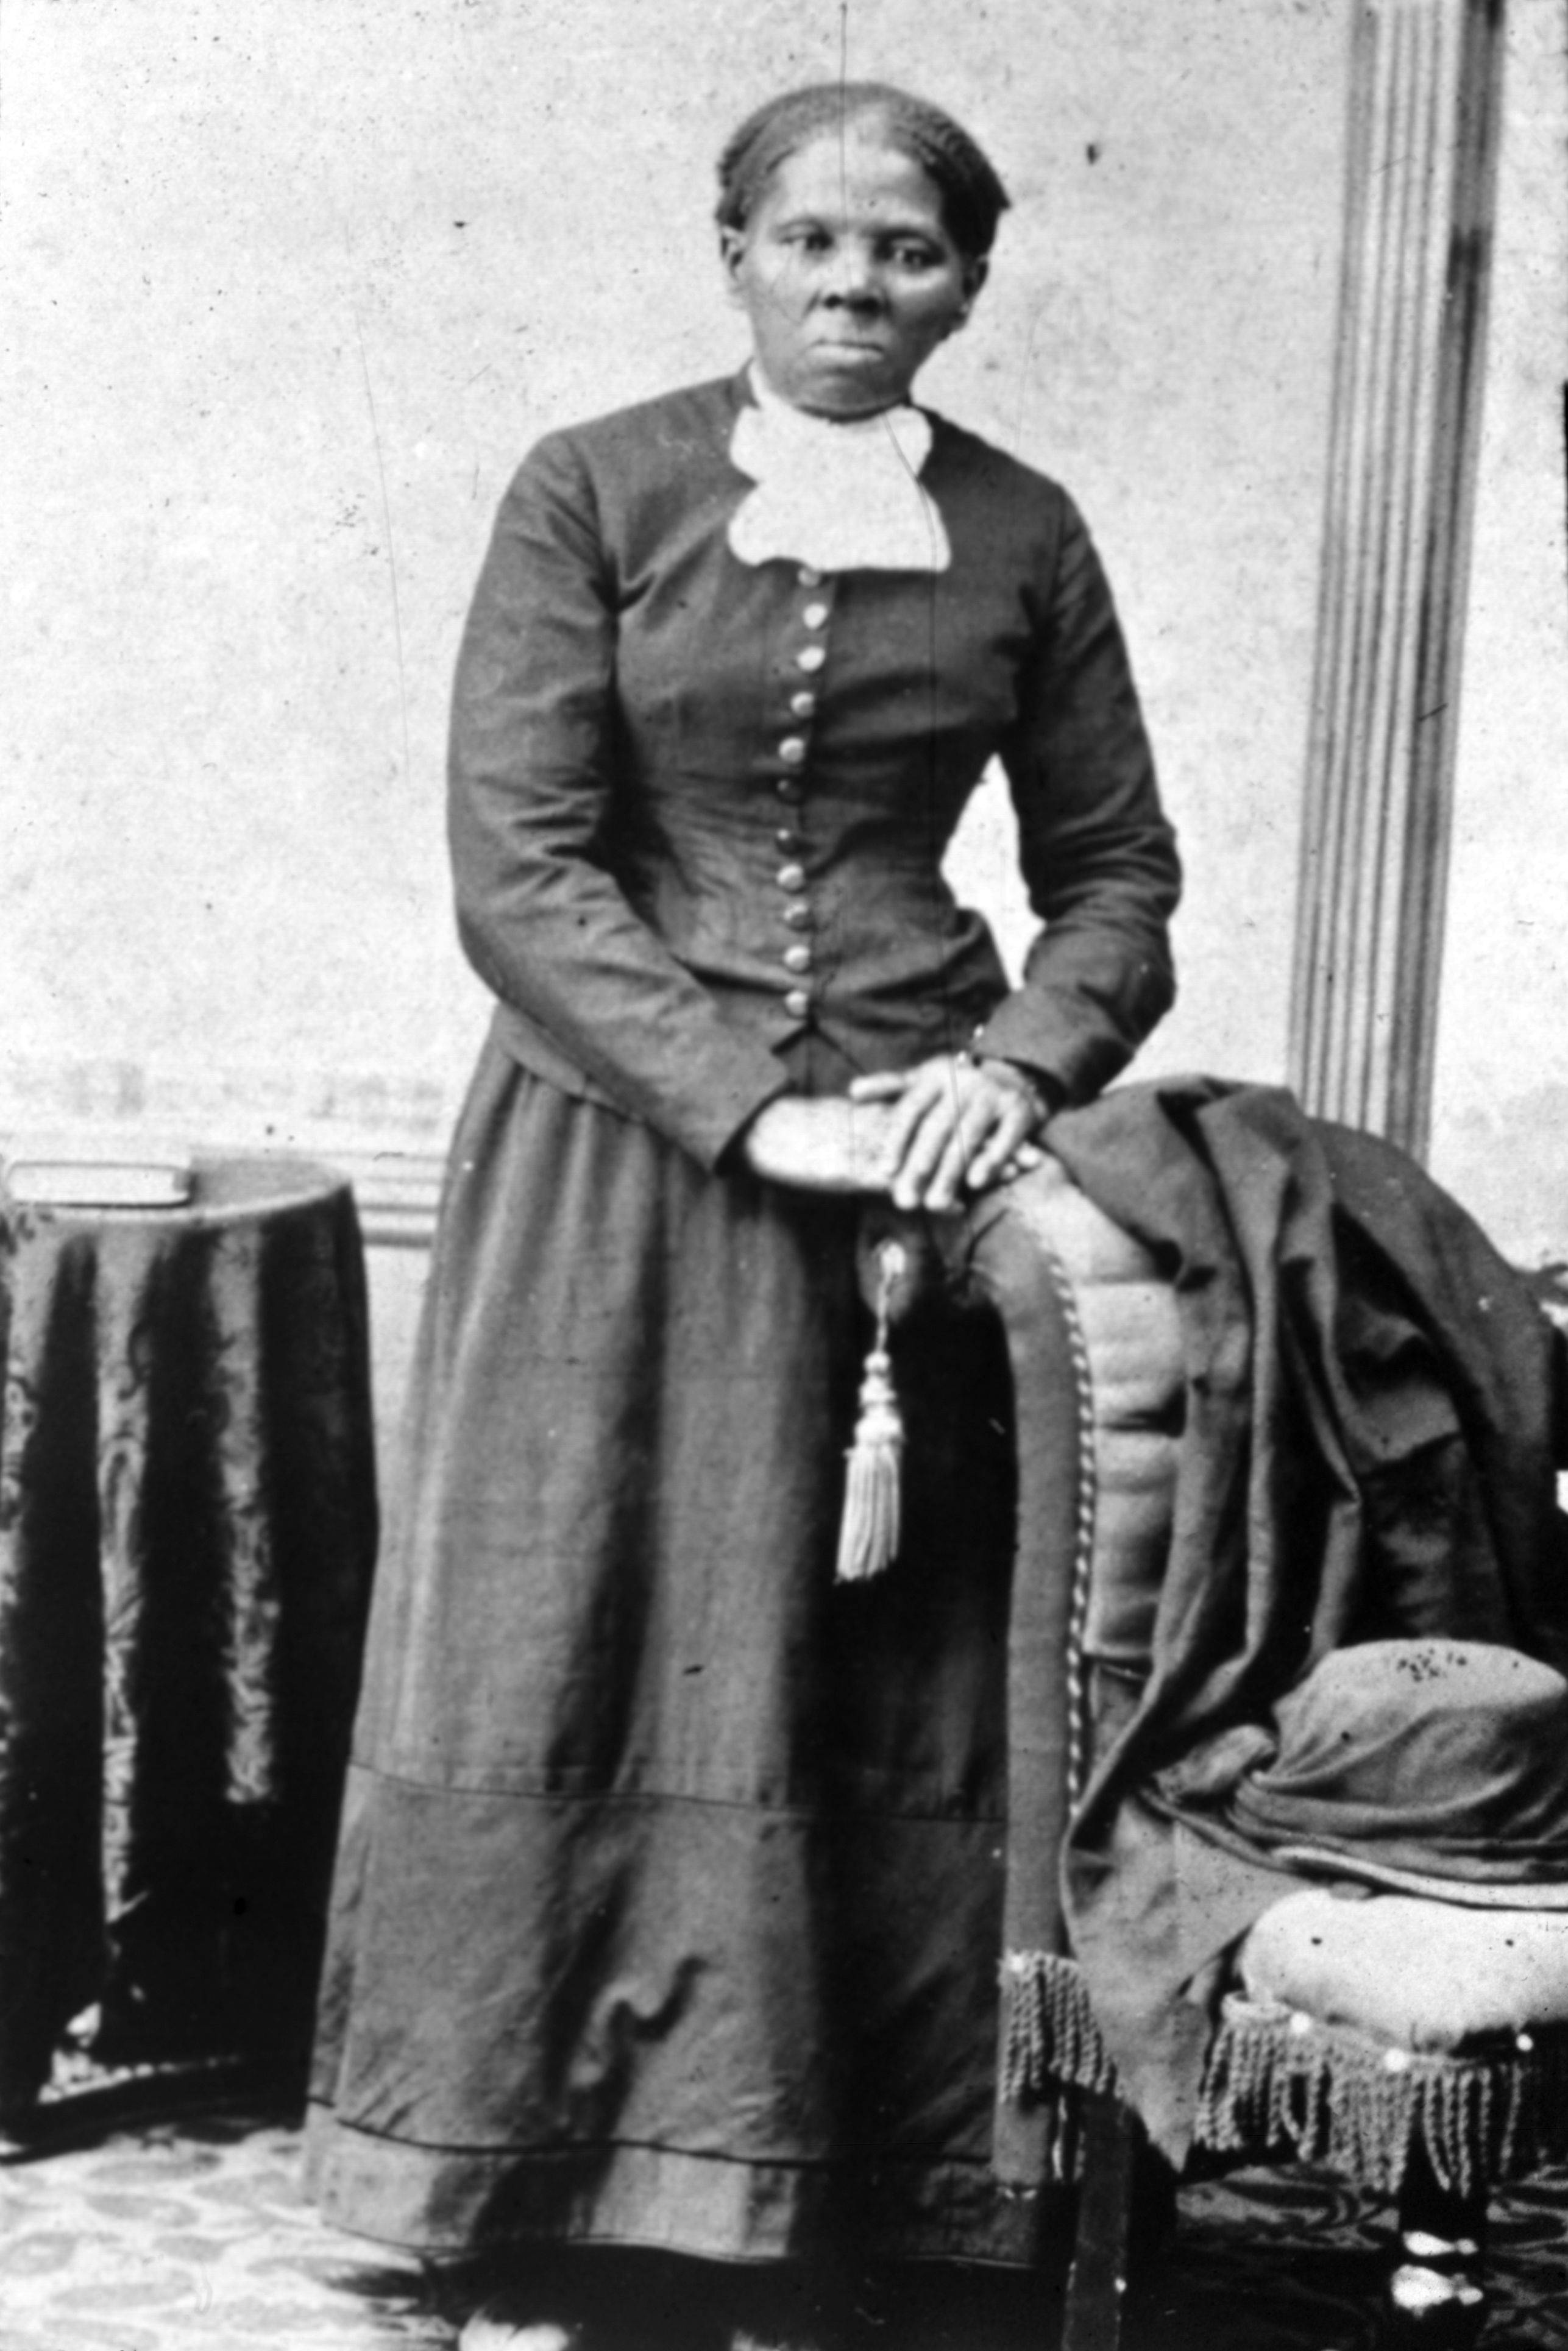 American abolitionist leader Harriet Tubman (1820 - 1913) who escaped slavery by marrying a free man and led many other slaves to safety using the abolitionist network known as the underground railway.   (Photo by MPI/Getty Images)